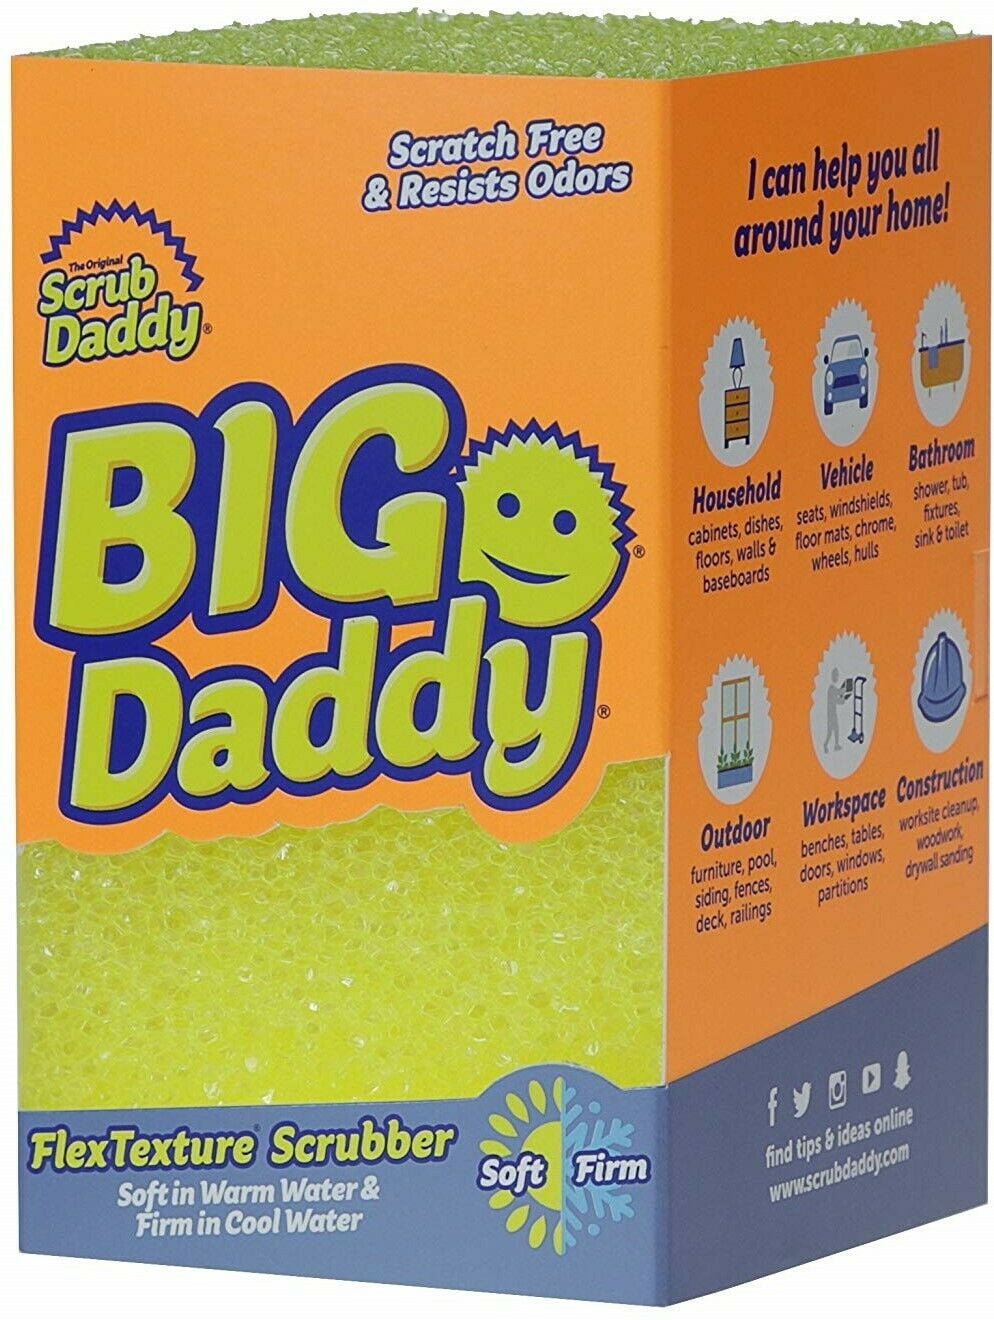 Scrub Daddy scrub daddy large sponge - big daddy - scratch-free sponge for  dishes and home, odor resistant, customizable size, temperatur